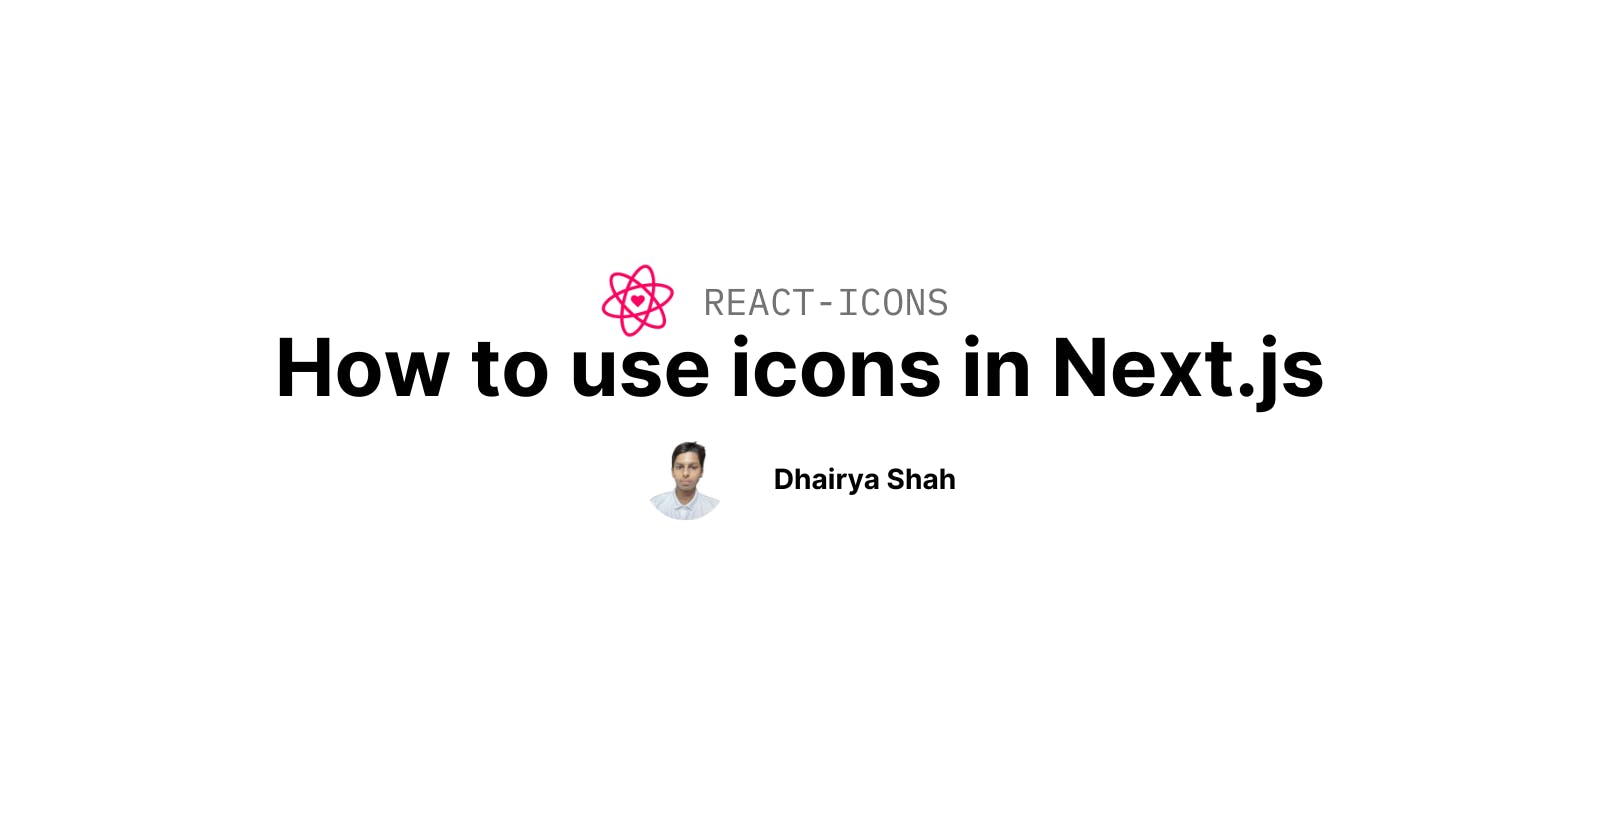 How to use icons in Next.js